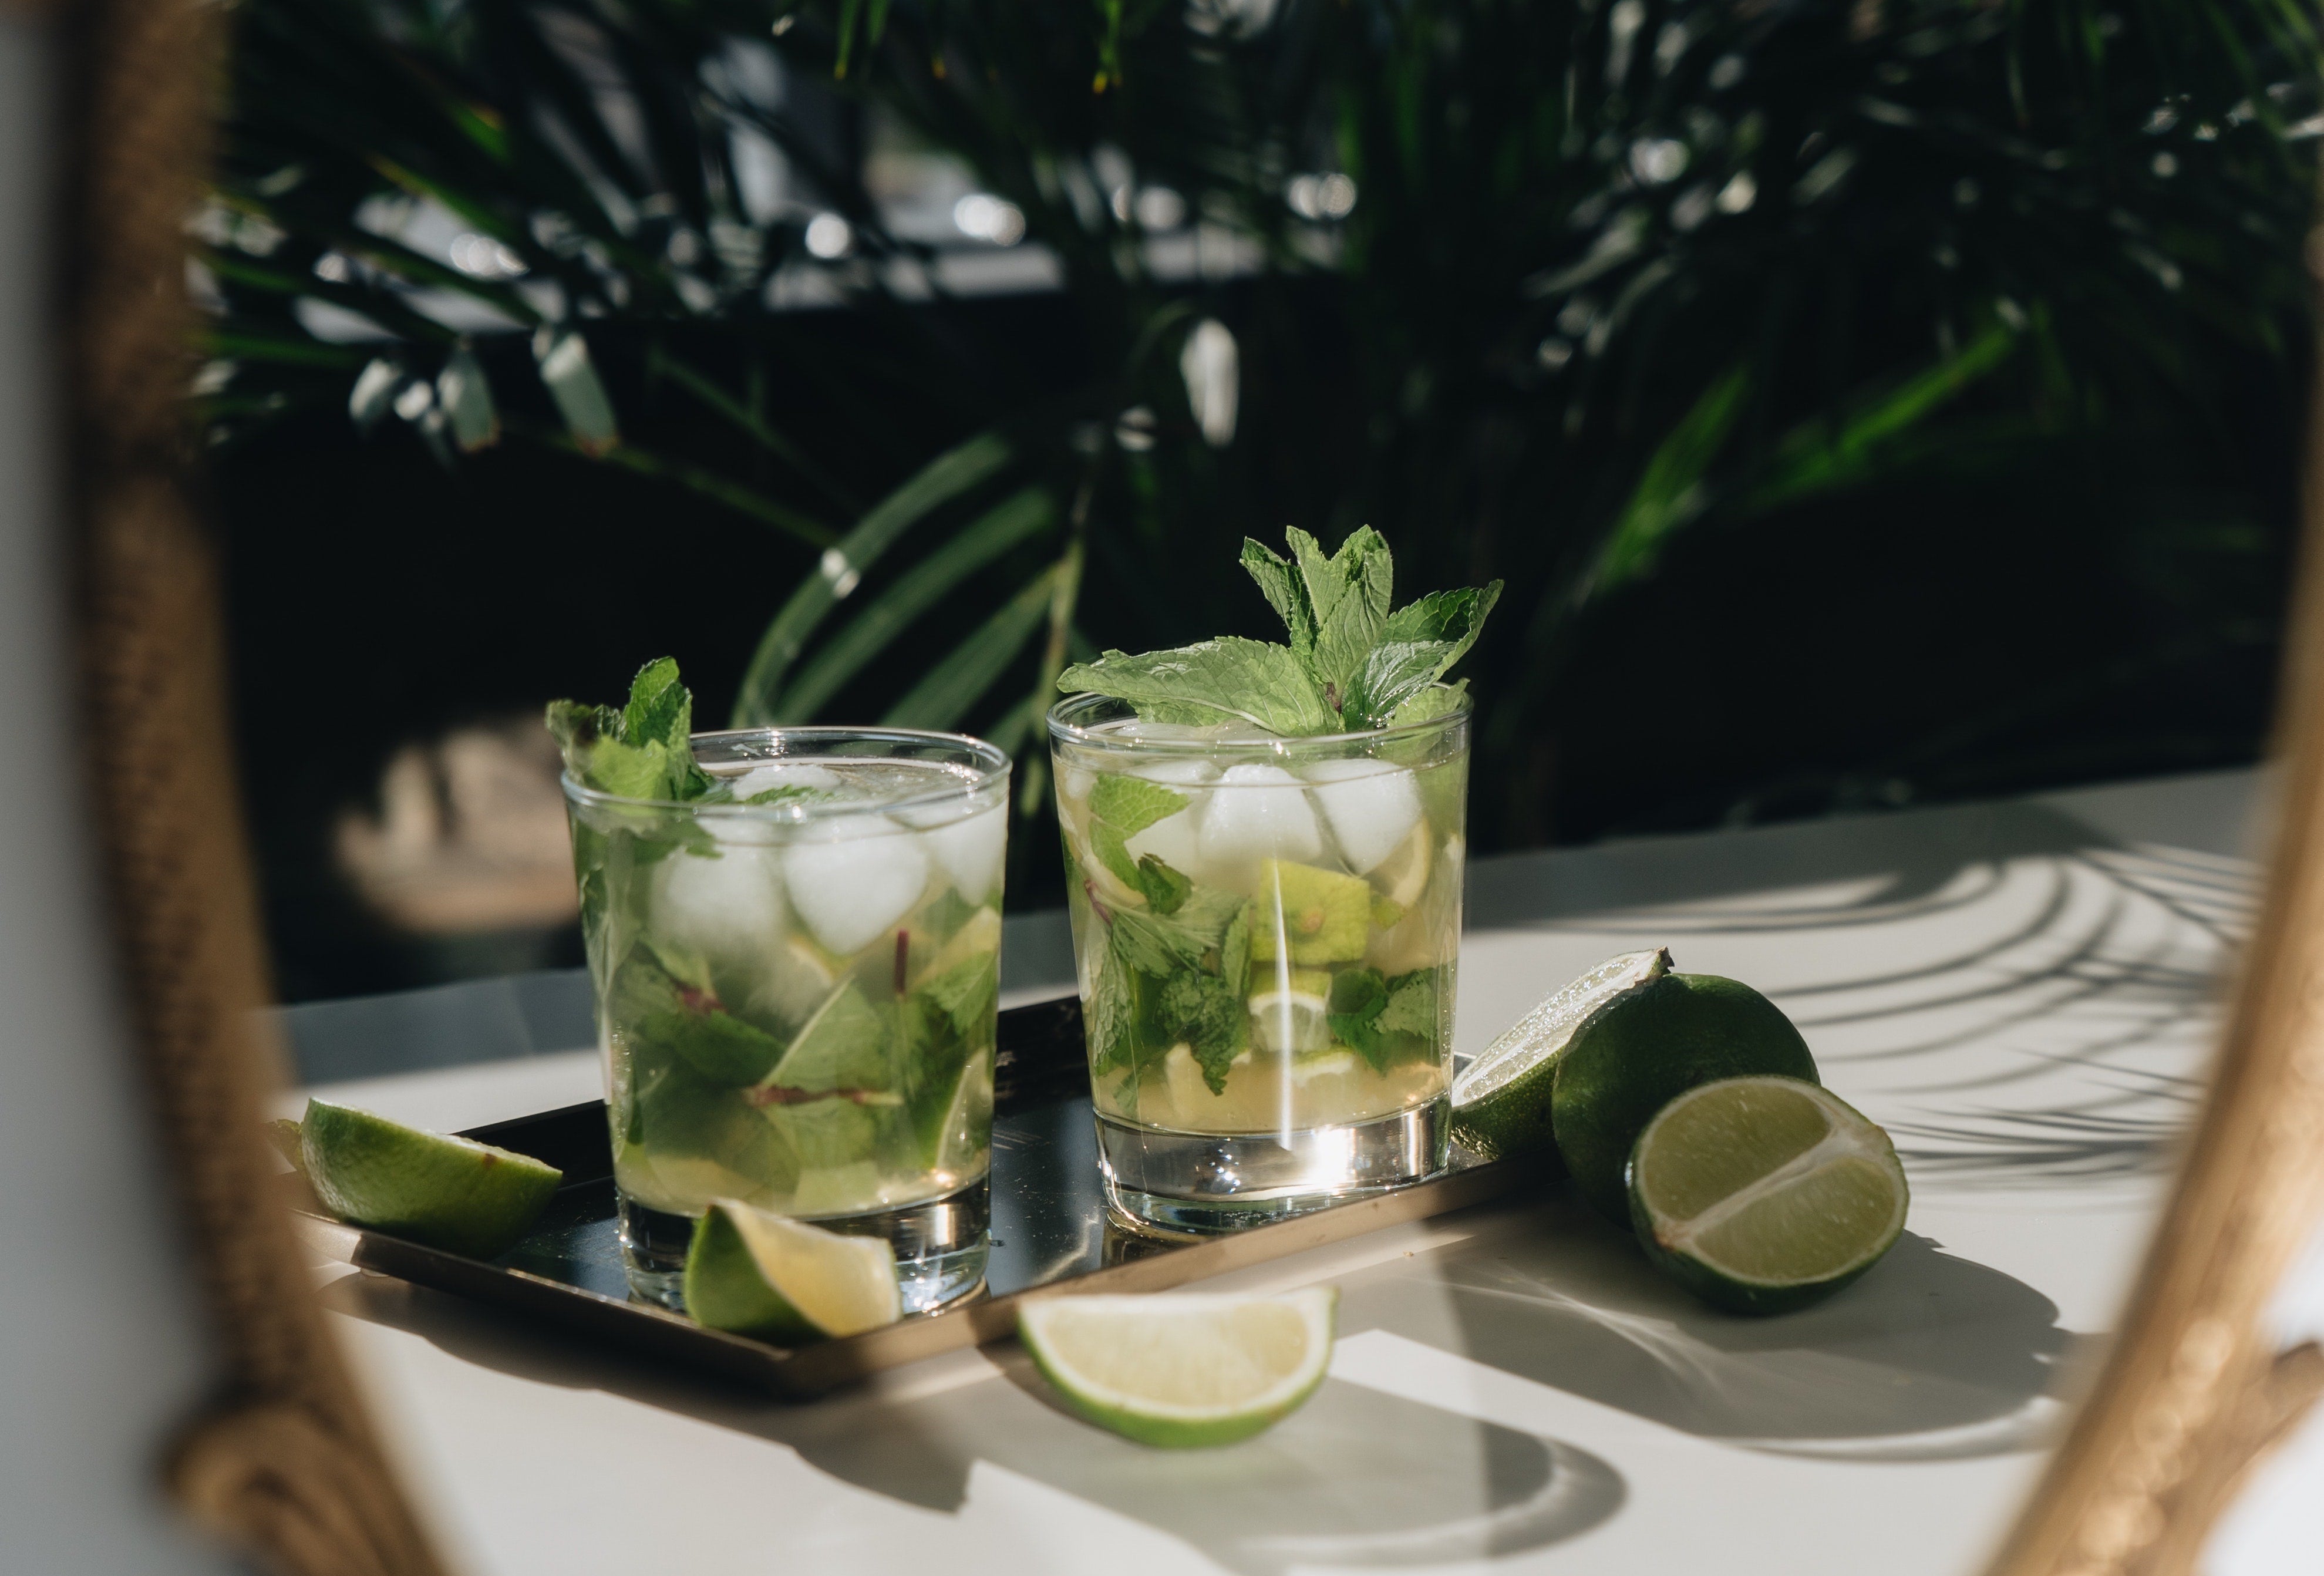 Alternate mojito recipes (without rum!)